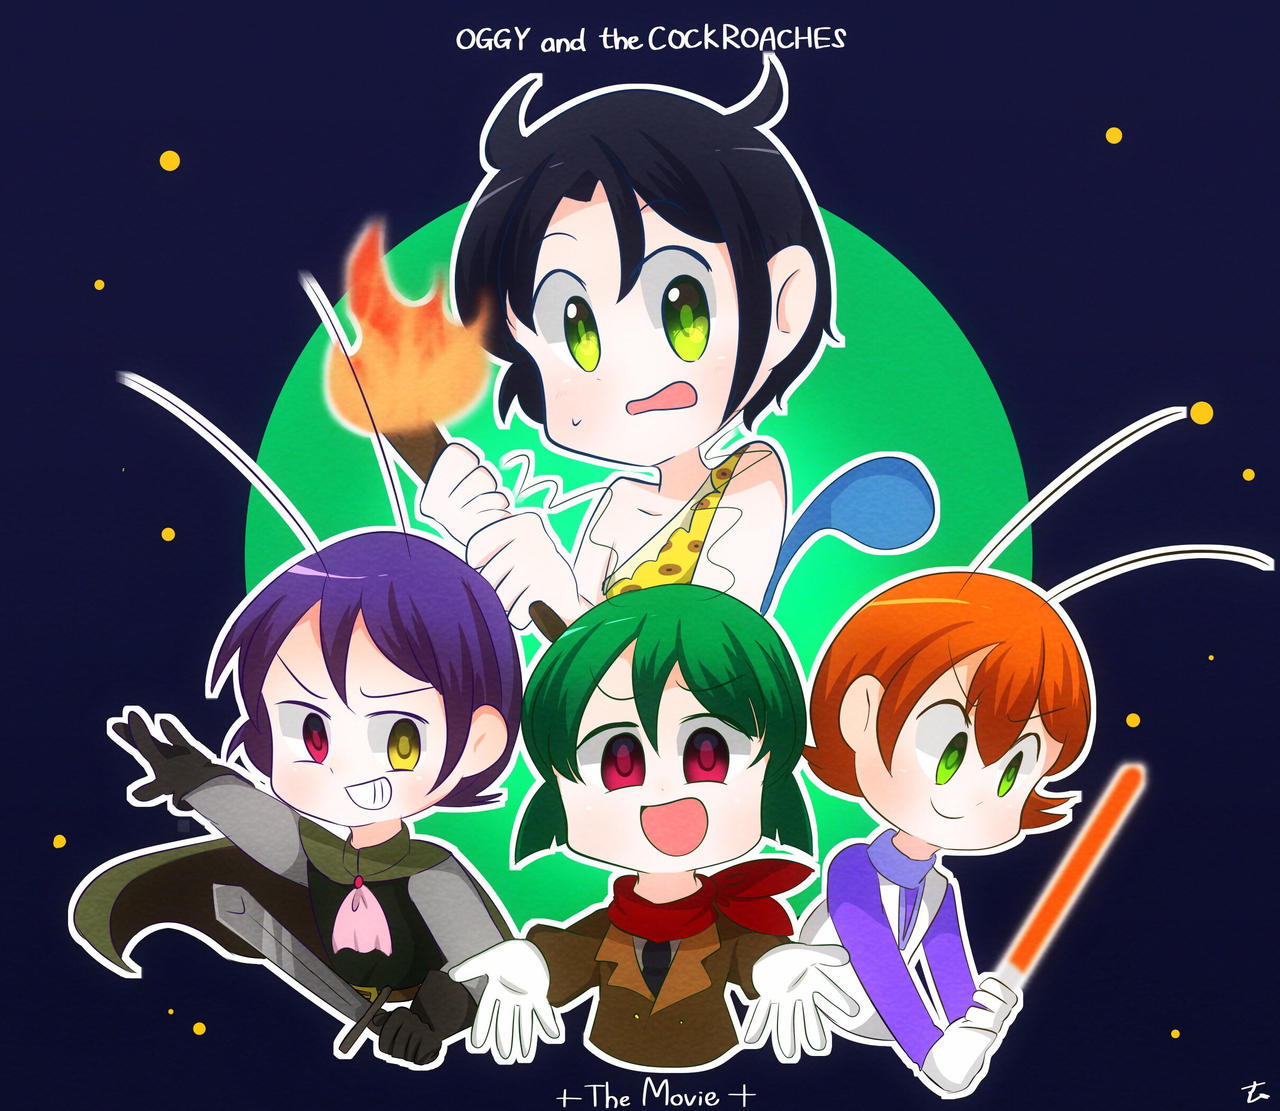 Oggy and the cockroaches (Human ver.) by sushiwakame on DeviantArt